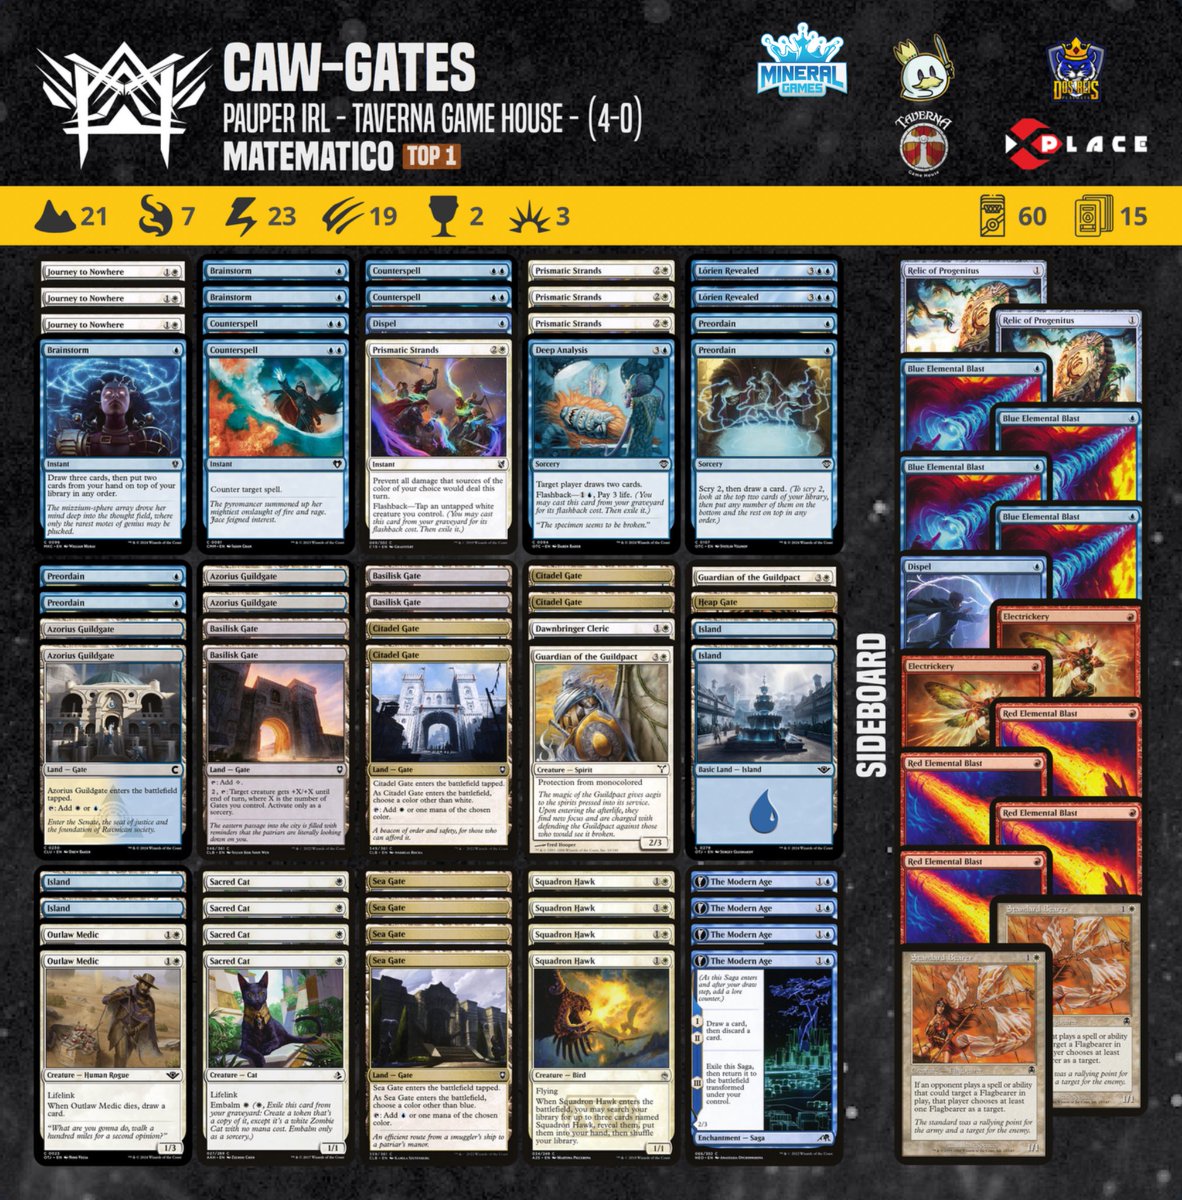 Our athlete MATEMATICO achieved a 4-0 in the Pauper IRL - Taverna Game House tournament with this Caw-Gates decklist.

#pauper  #magic #mtgcommon #metagamepauper #mtgpauper #magicthegathering #wizardsofthecoast 

@PauperDecklists  @fireshoes